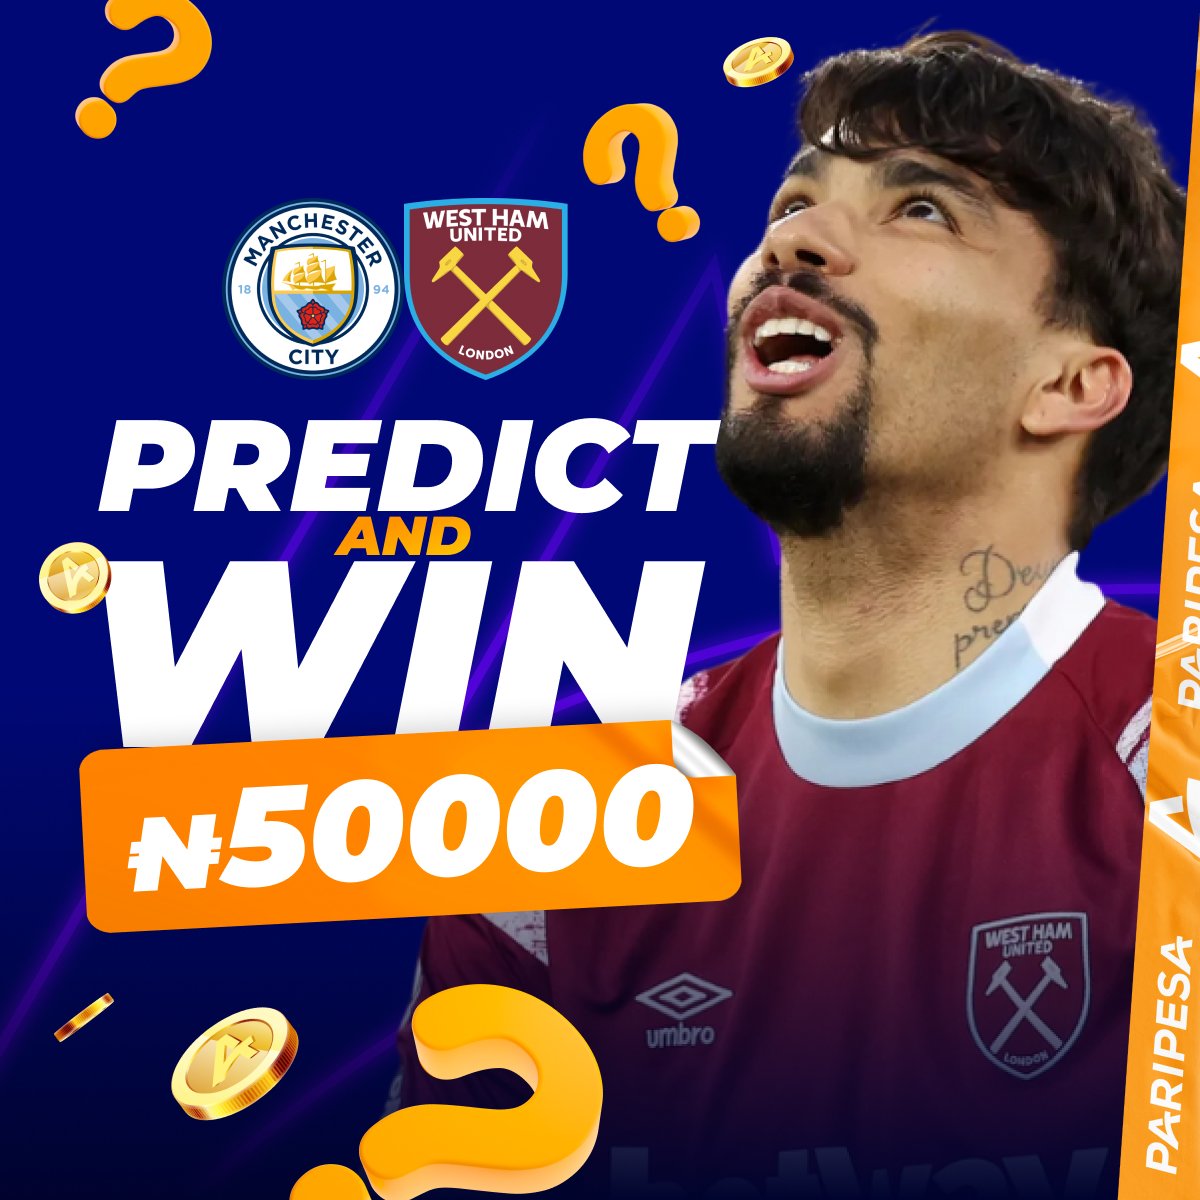 ⭐️PREDICT & WIN 💰 ₦10000 ✅ JOIN 👉 m.paripesa.bet/g9nw ⚠️Write ID and the score of the Man City vs West Ham 👉Example: ID12345678, 4-2 ‼️One ID - one tweet ‼️Bets are accepted before the start of the match! 🤖 20.05 random generator will choose 5 winners